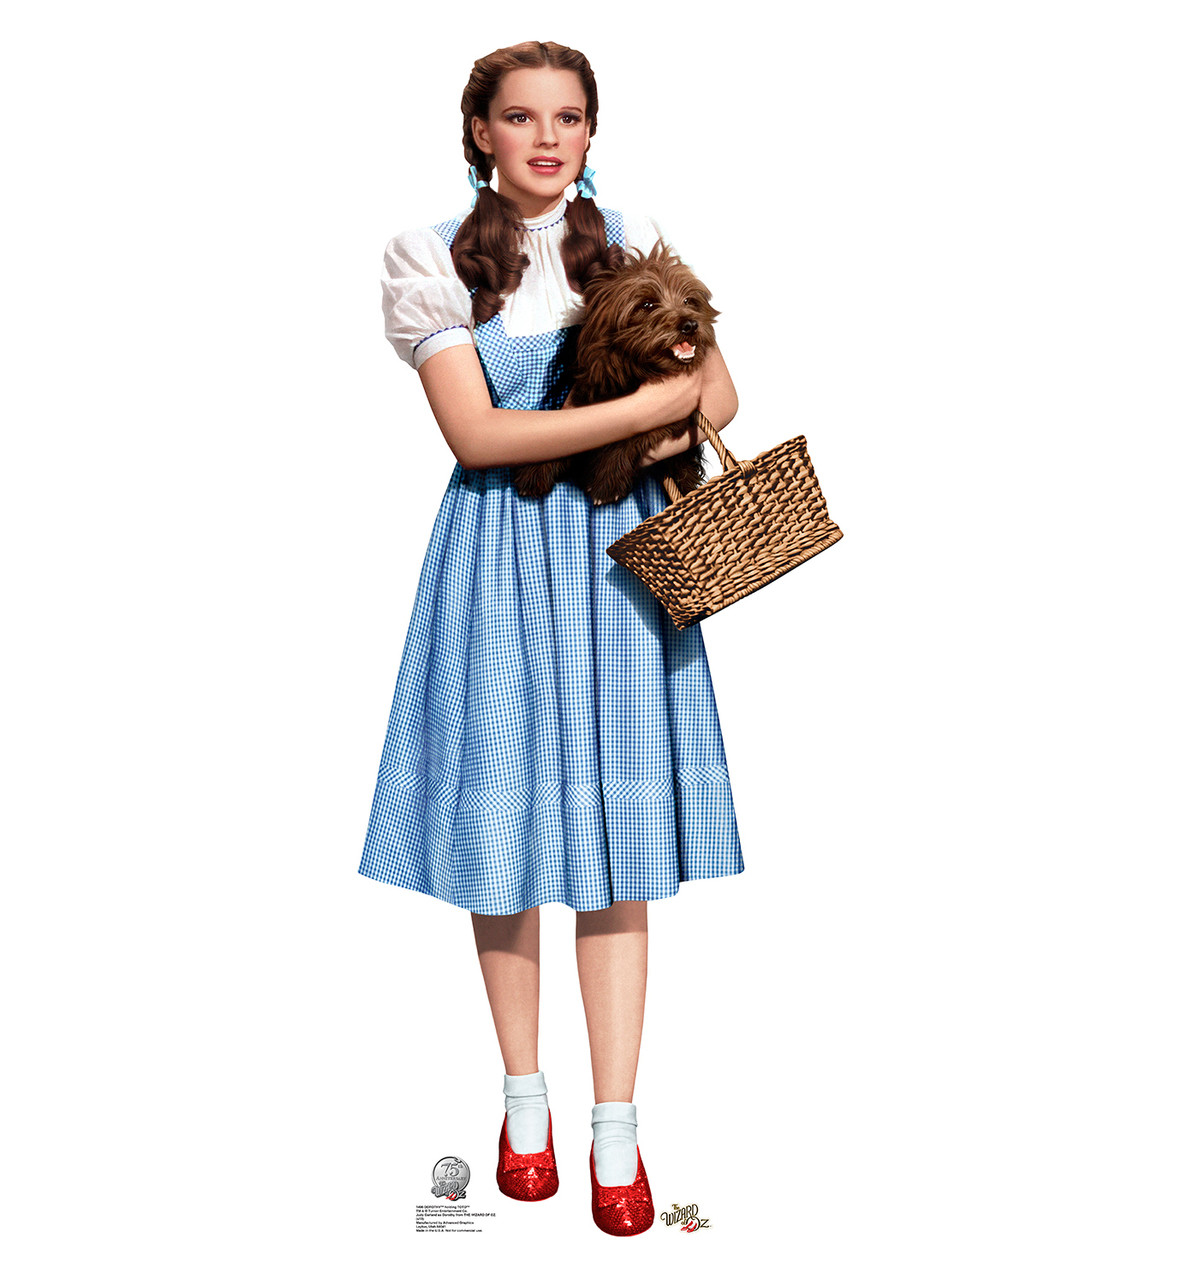 Dorothy from the Wizard of Oz Holding Toto - Life size cardboard cutout